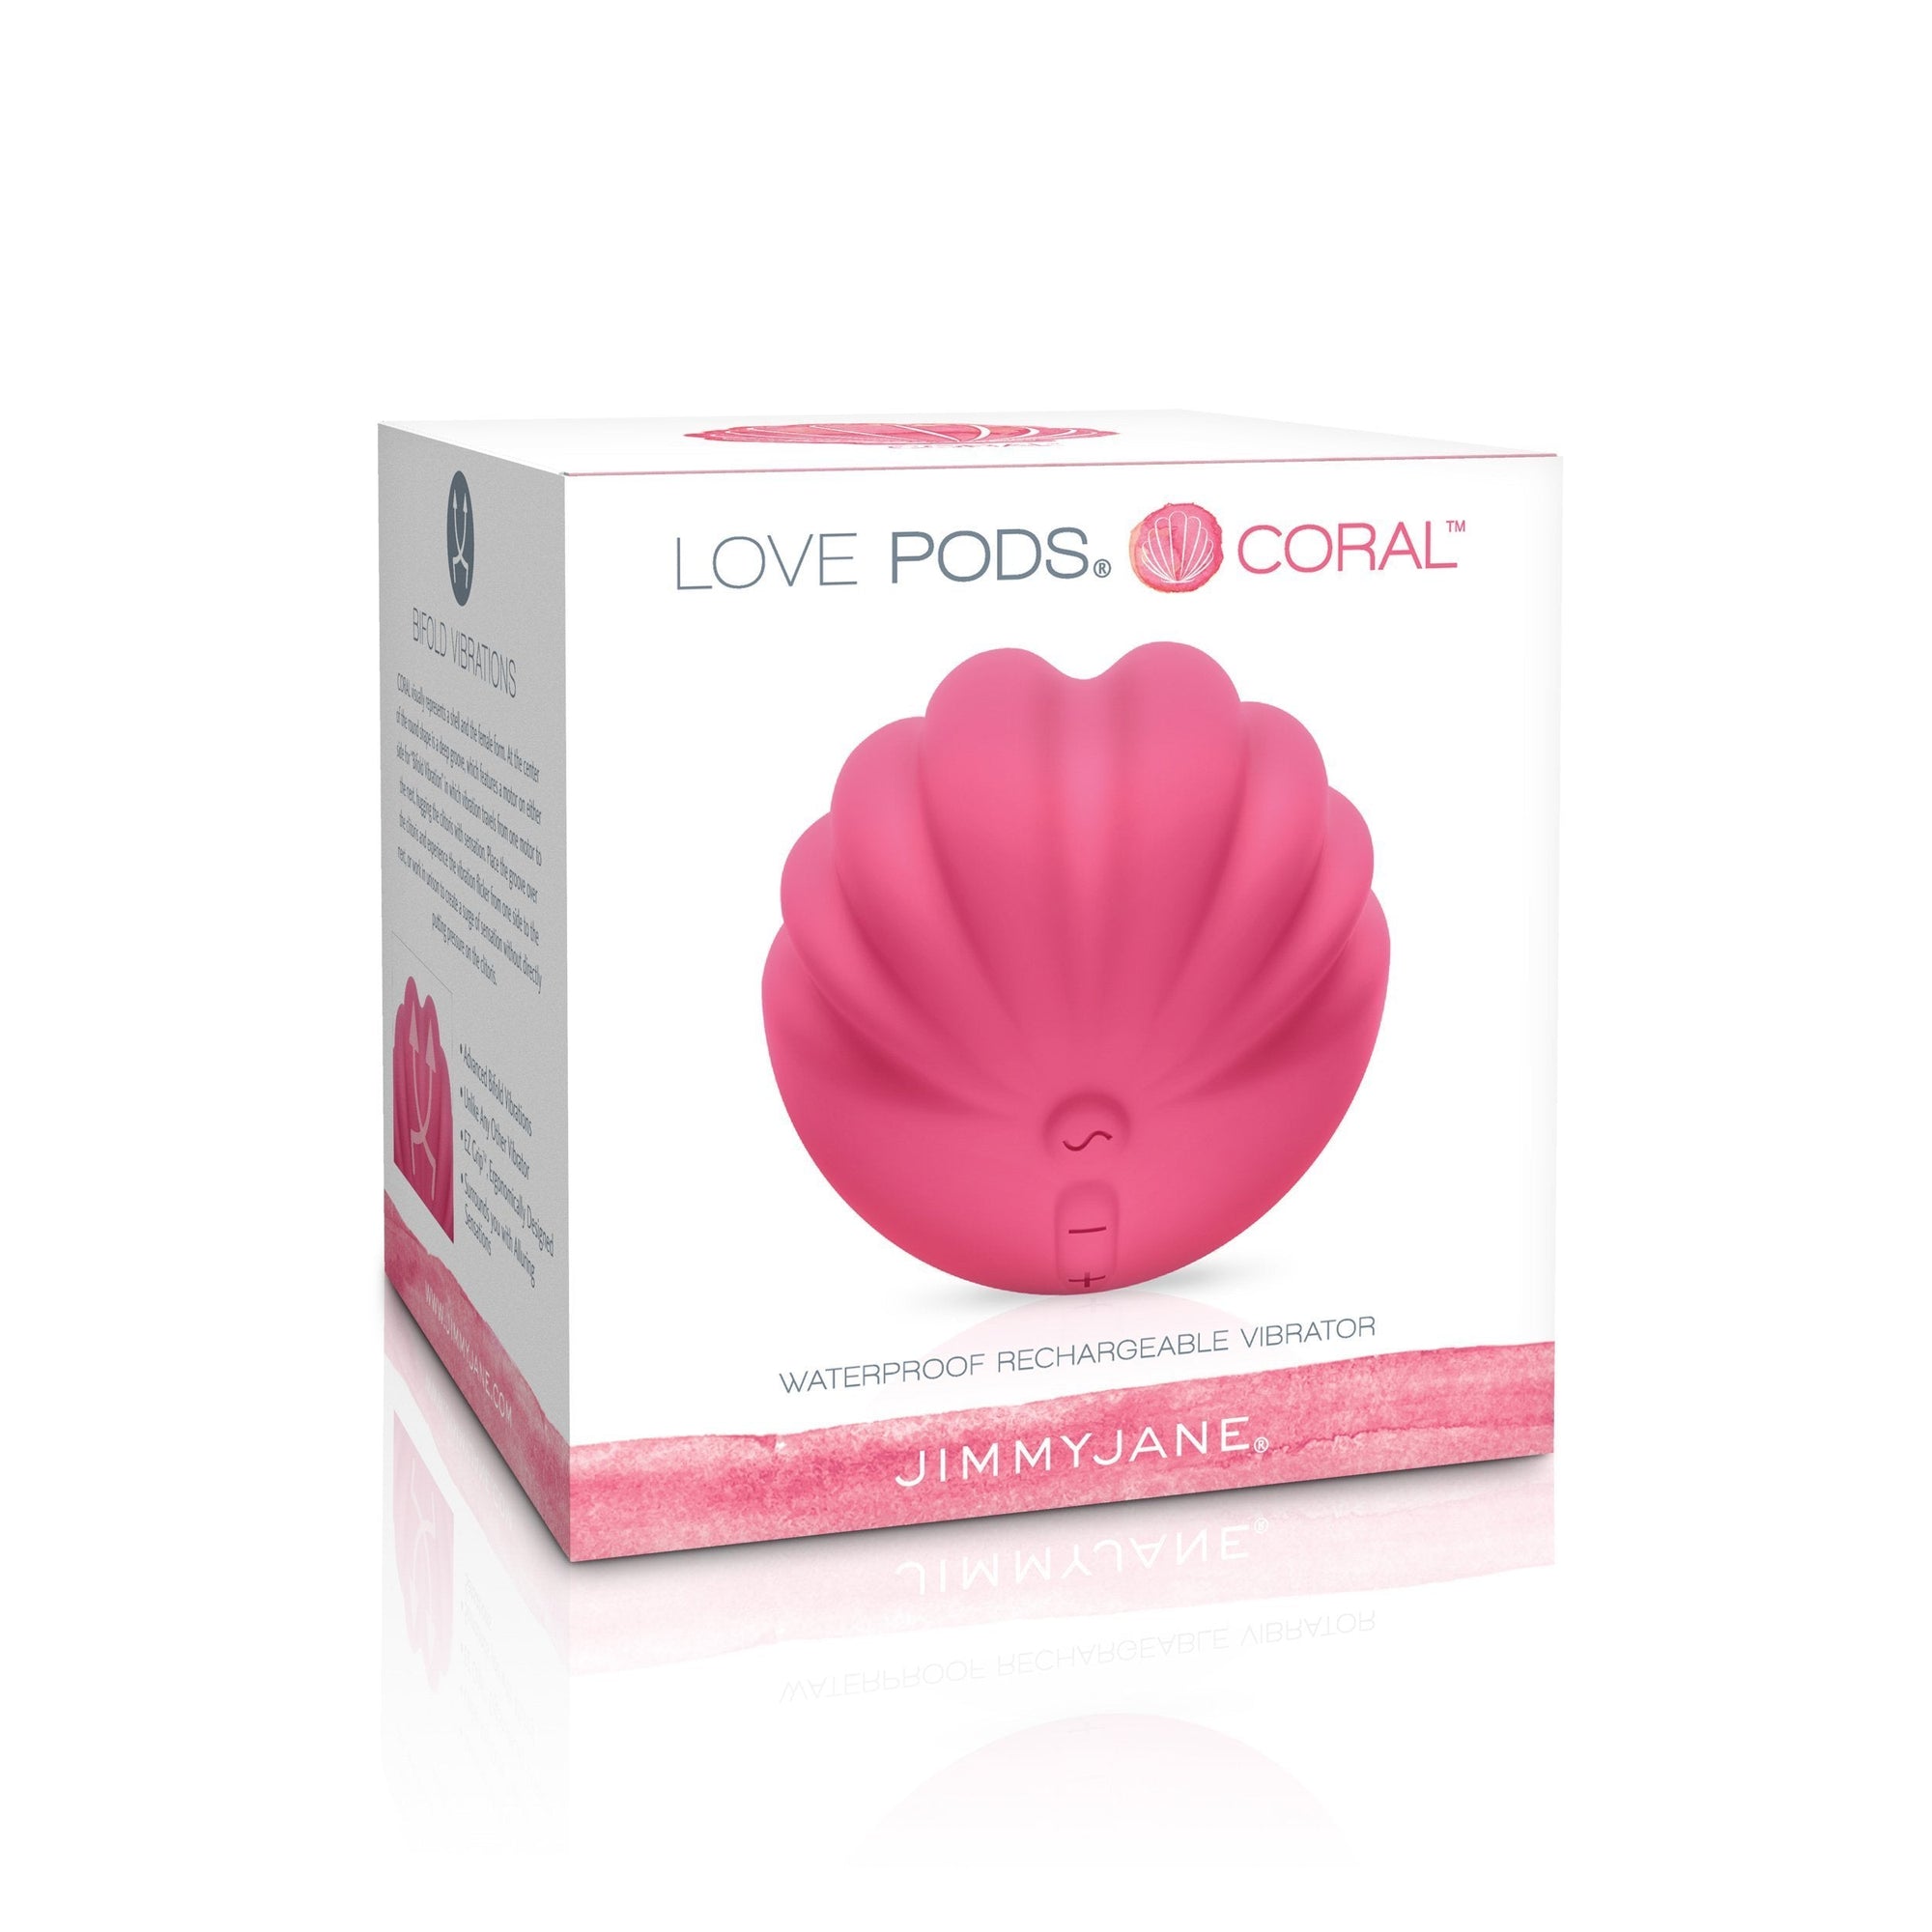 Jimmy Jane - Love Pods Coral Waterproof Vibrator (Pink) -  Clit Massager (Vibration) Rechargeable  Durio.sg